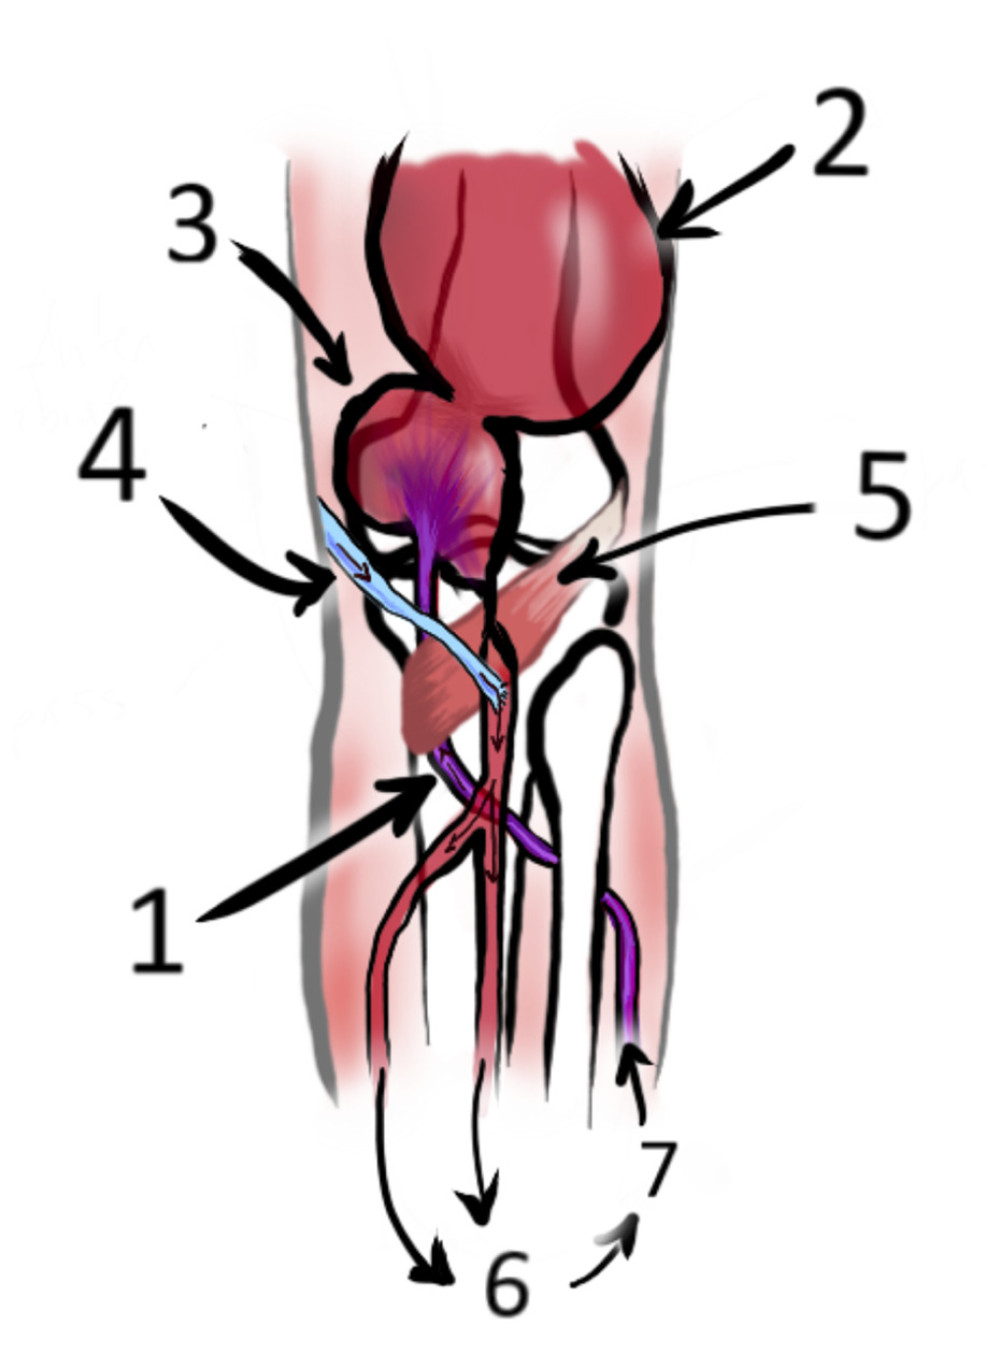 Descriptive and schematic drawing of the refueling mechanism of popliteal aneurism by ATA. (Drawn by Dr. Melani and used with permission). (1) Anterior tibial artery arising above the joint line, taking a medial path anterior to the popliteal muscle (Type 2A-2 of Kim Classification). (2) Pseudoaneurysm. (3) Legated popliteal aneurysm. (4) Femoro-popliteal bypass. (5) Popliteal muscle. (6) Foot/ankle circulation. (7) Retrograde blood flow reperfusion of the ligated aneurysm trough the anterior tibial artery.